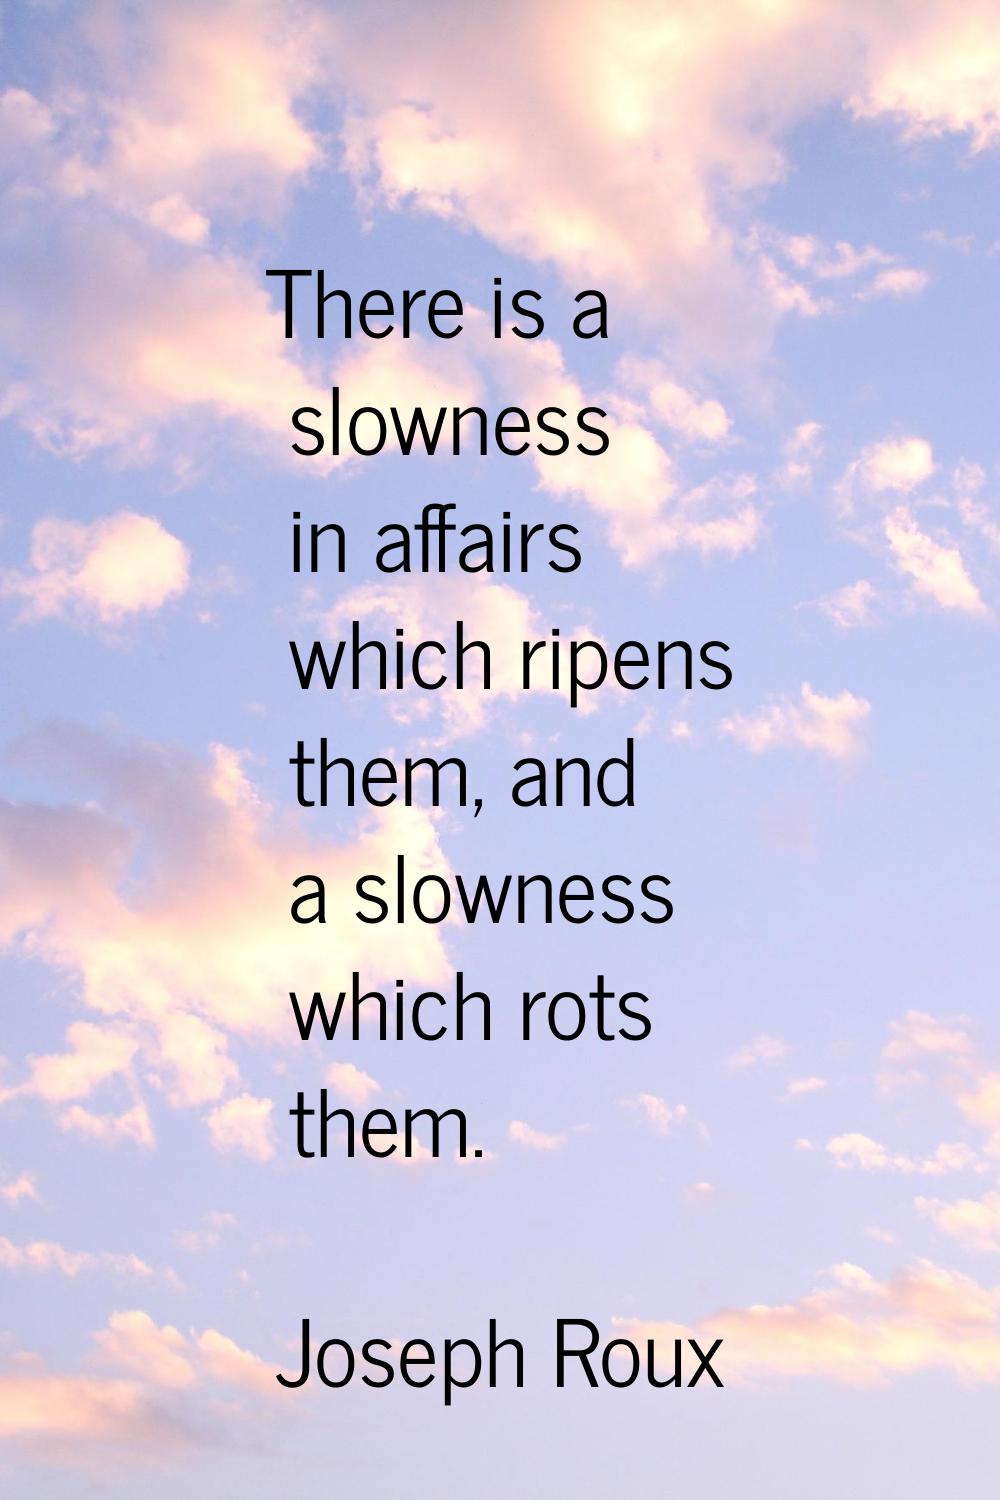 There is a slowness in affairs which ripens them, and a slowness which rots them.